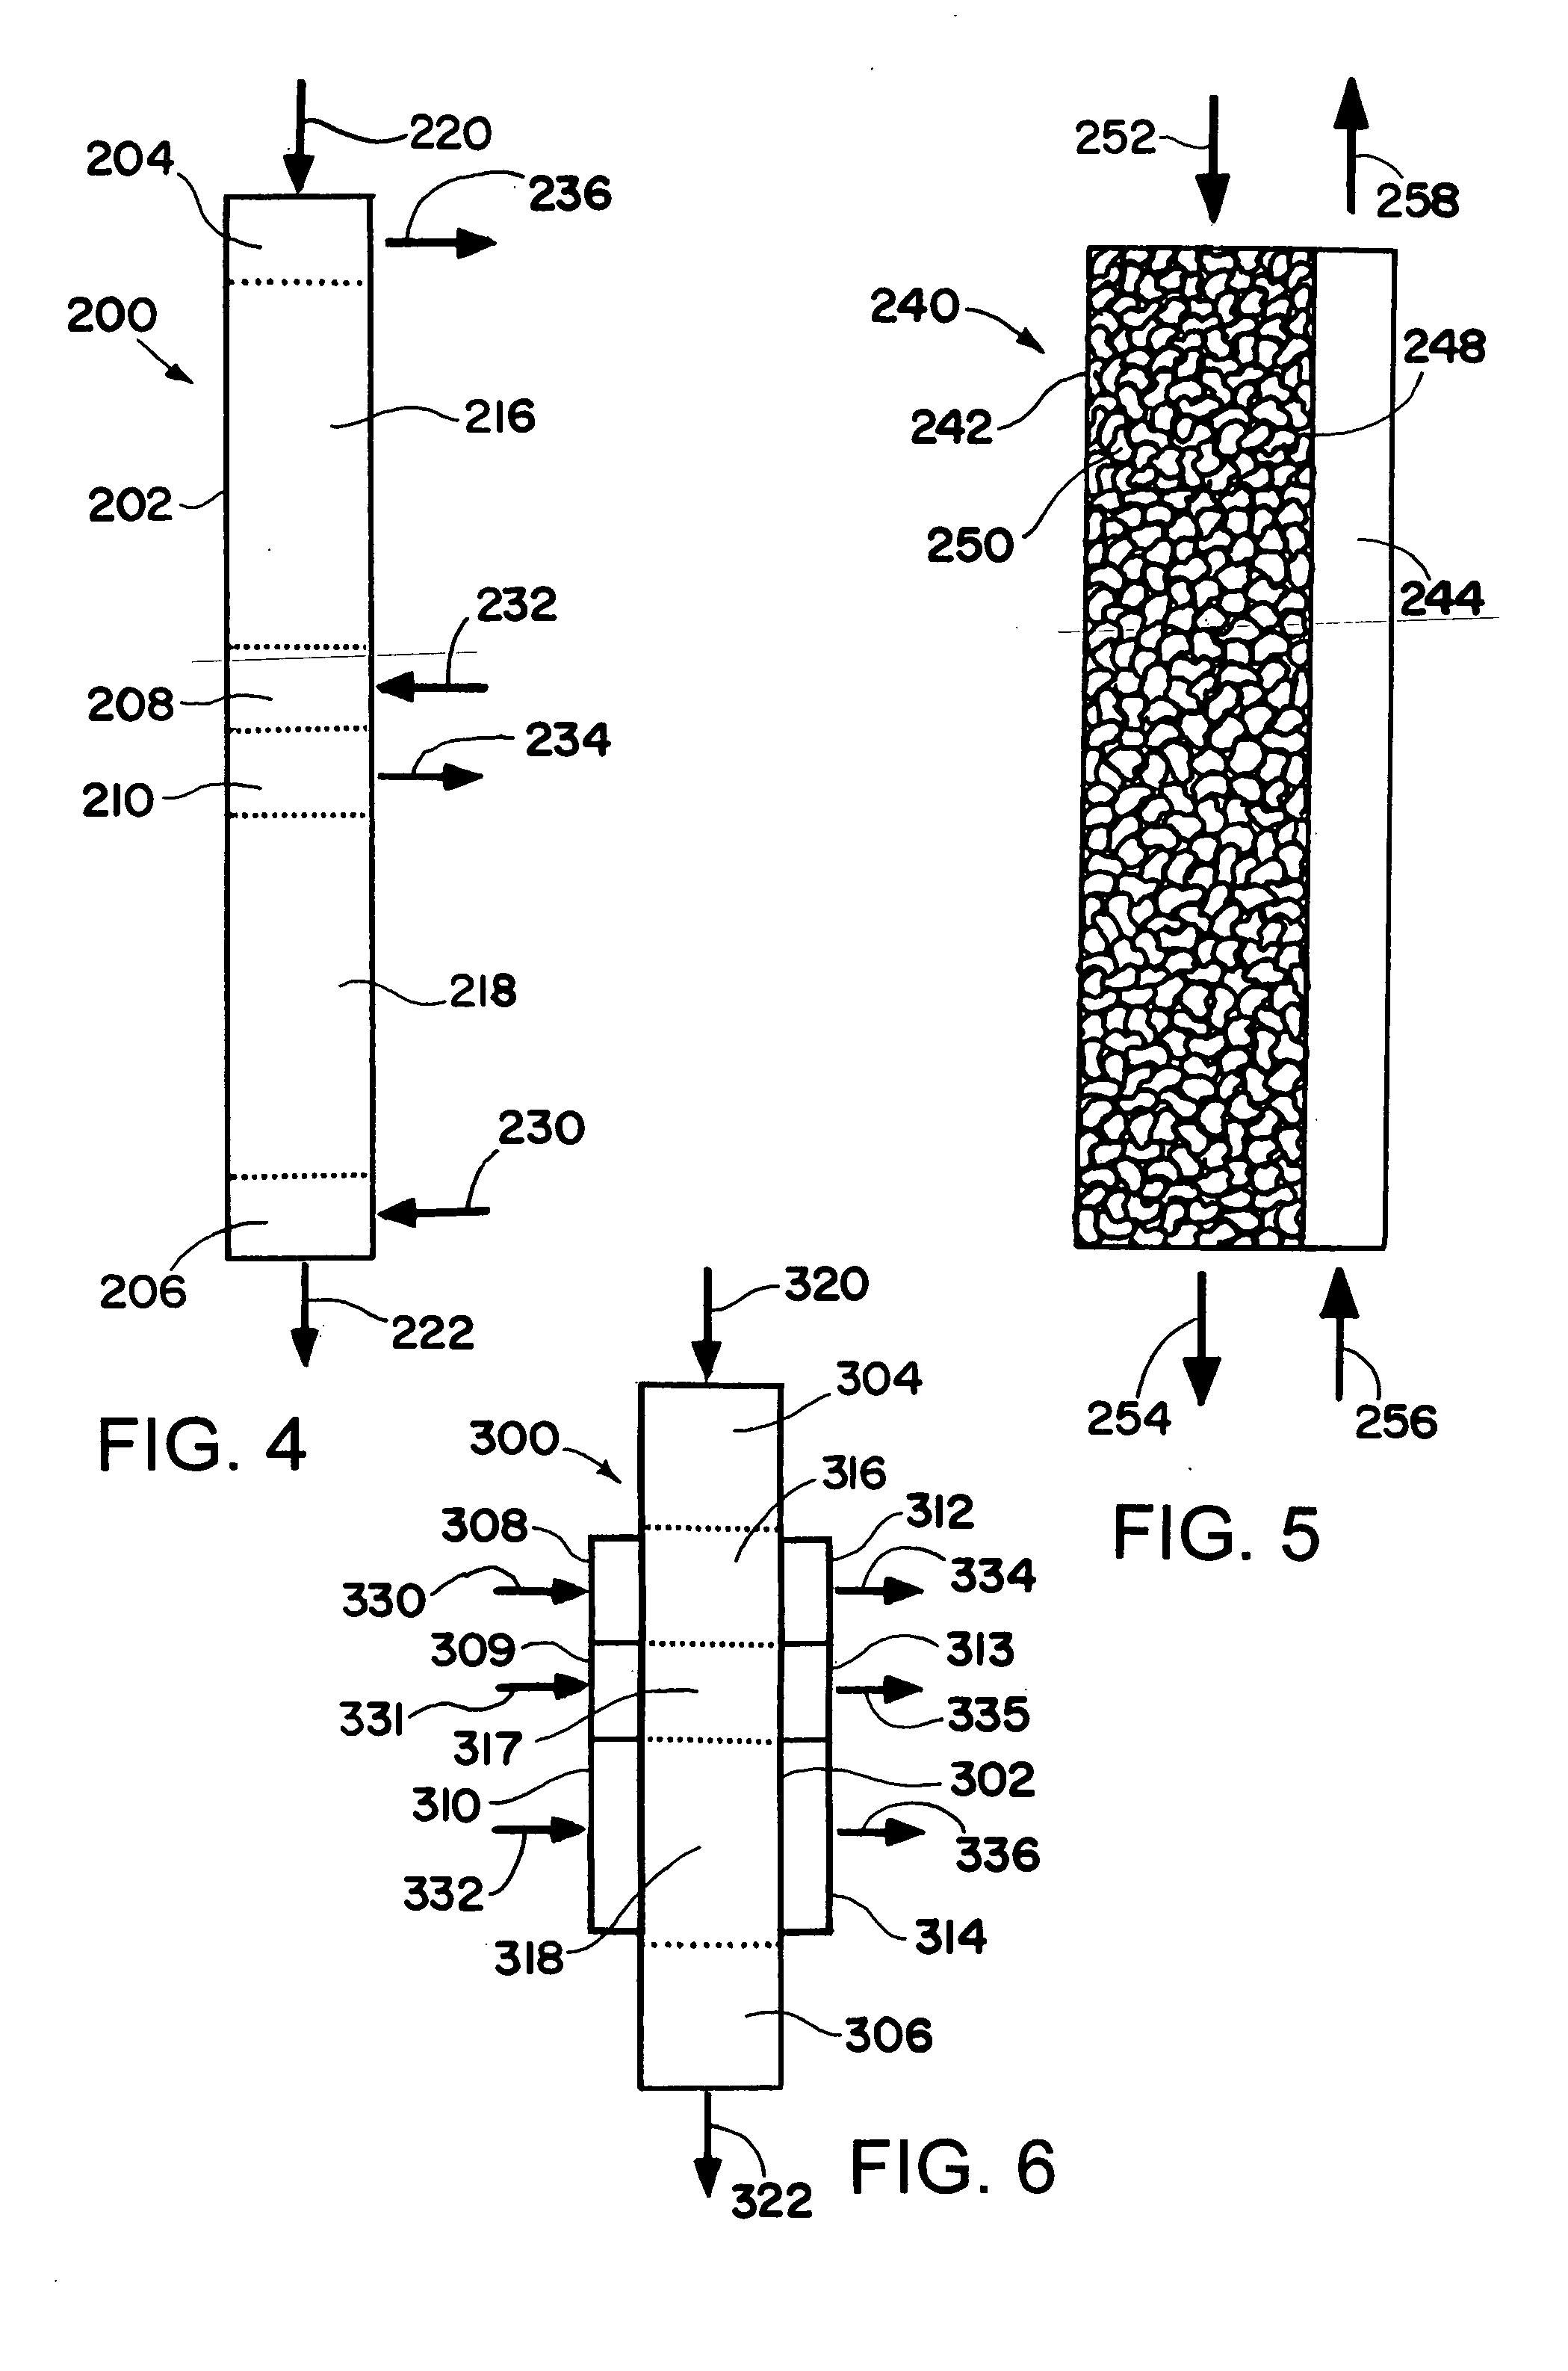 Process for conducting an equilibrium limited chemical reaction using microchannel technology